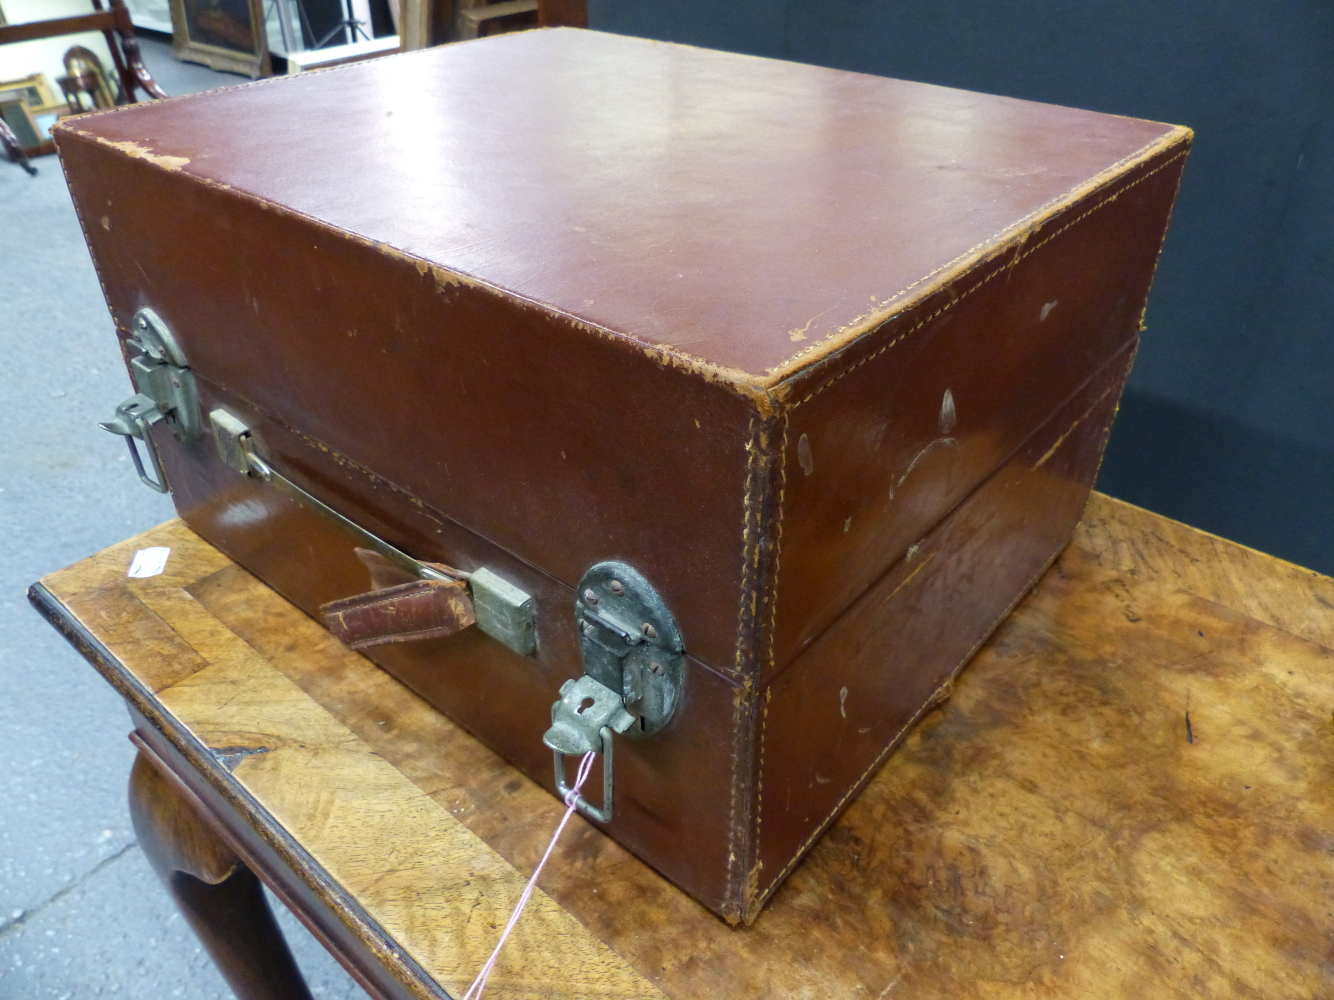 AN EARLY A.E.R. SHORT/LONG WAVE 5 VALVE RADIO IN LEATHER OUTER CASE. - Image 8 of 8